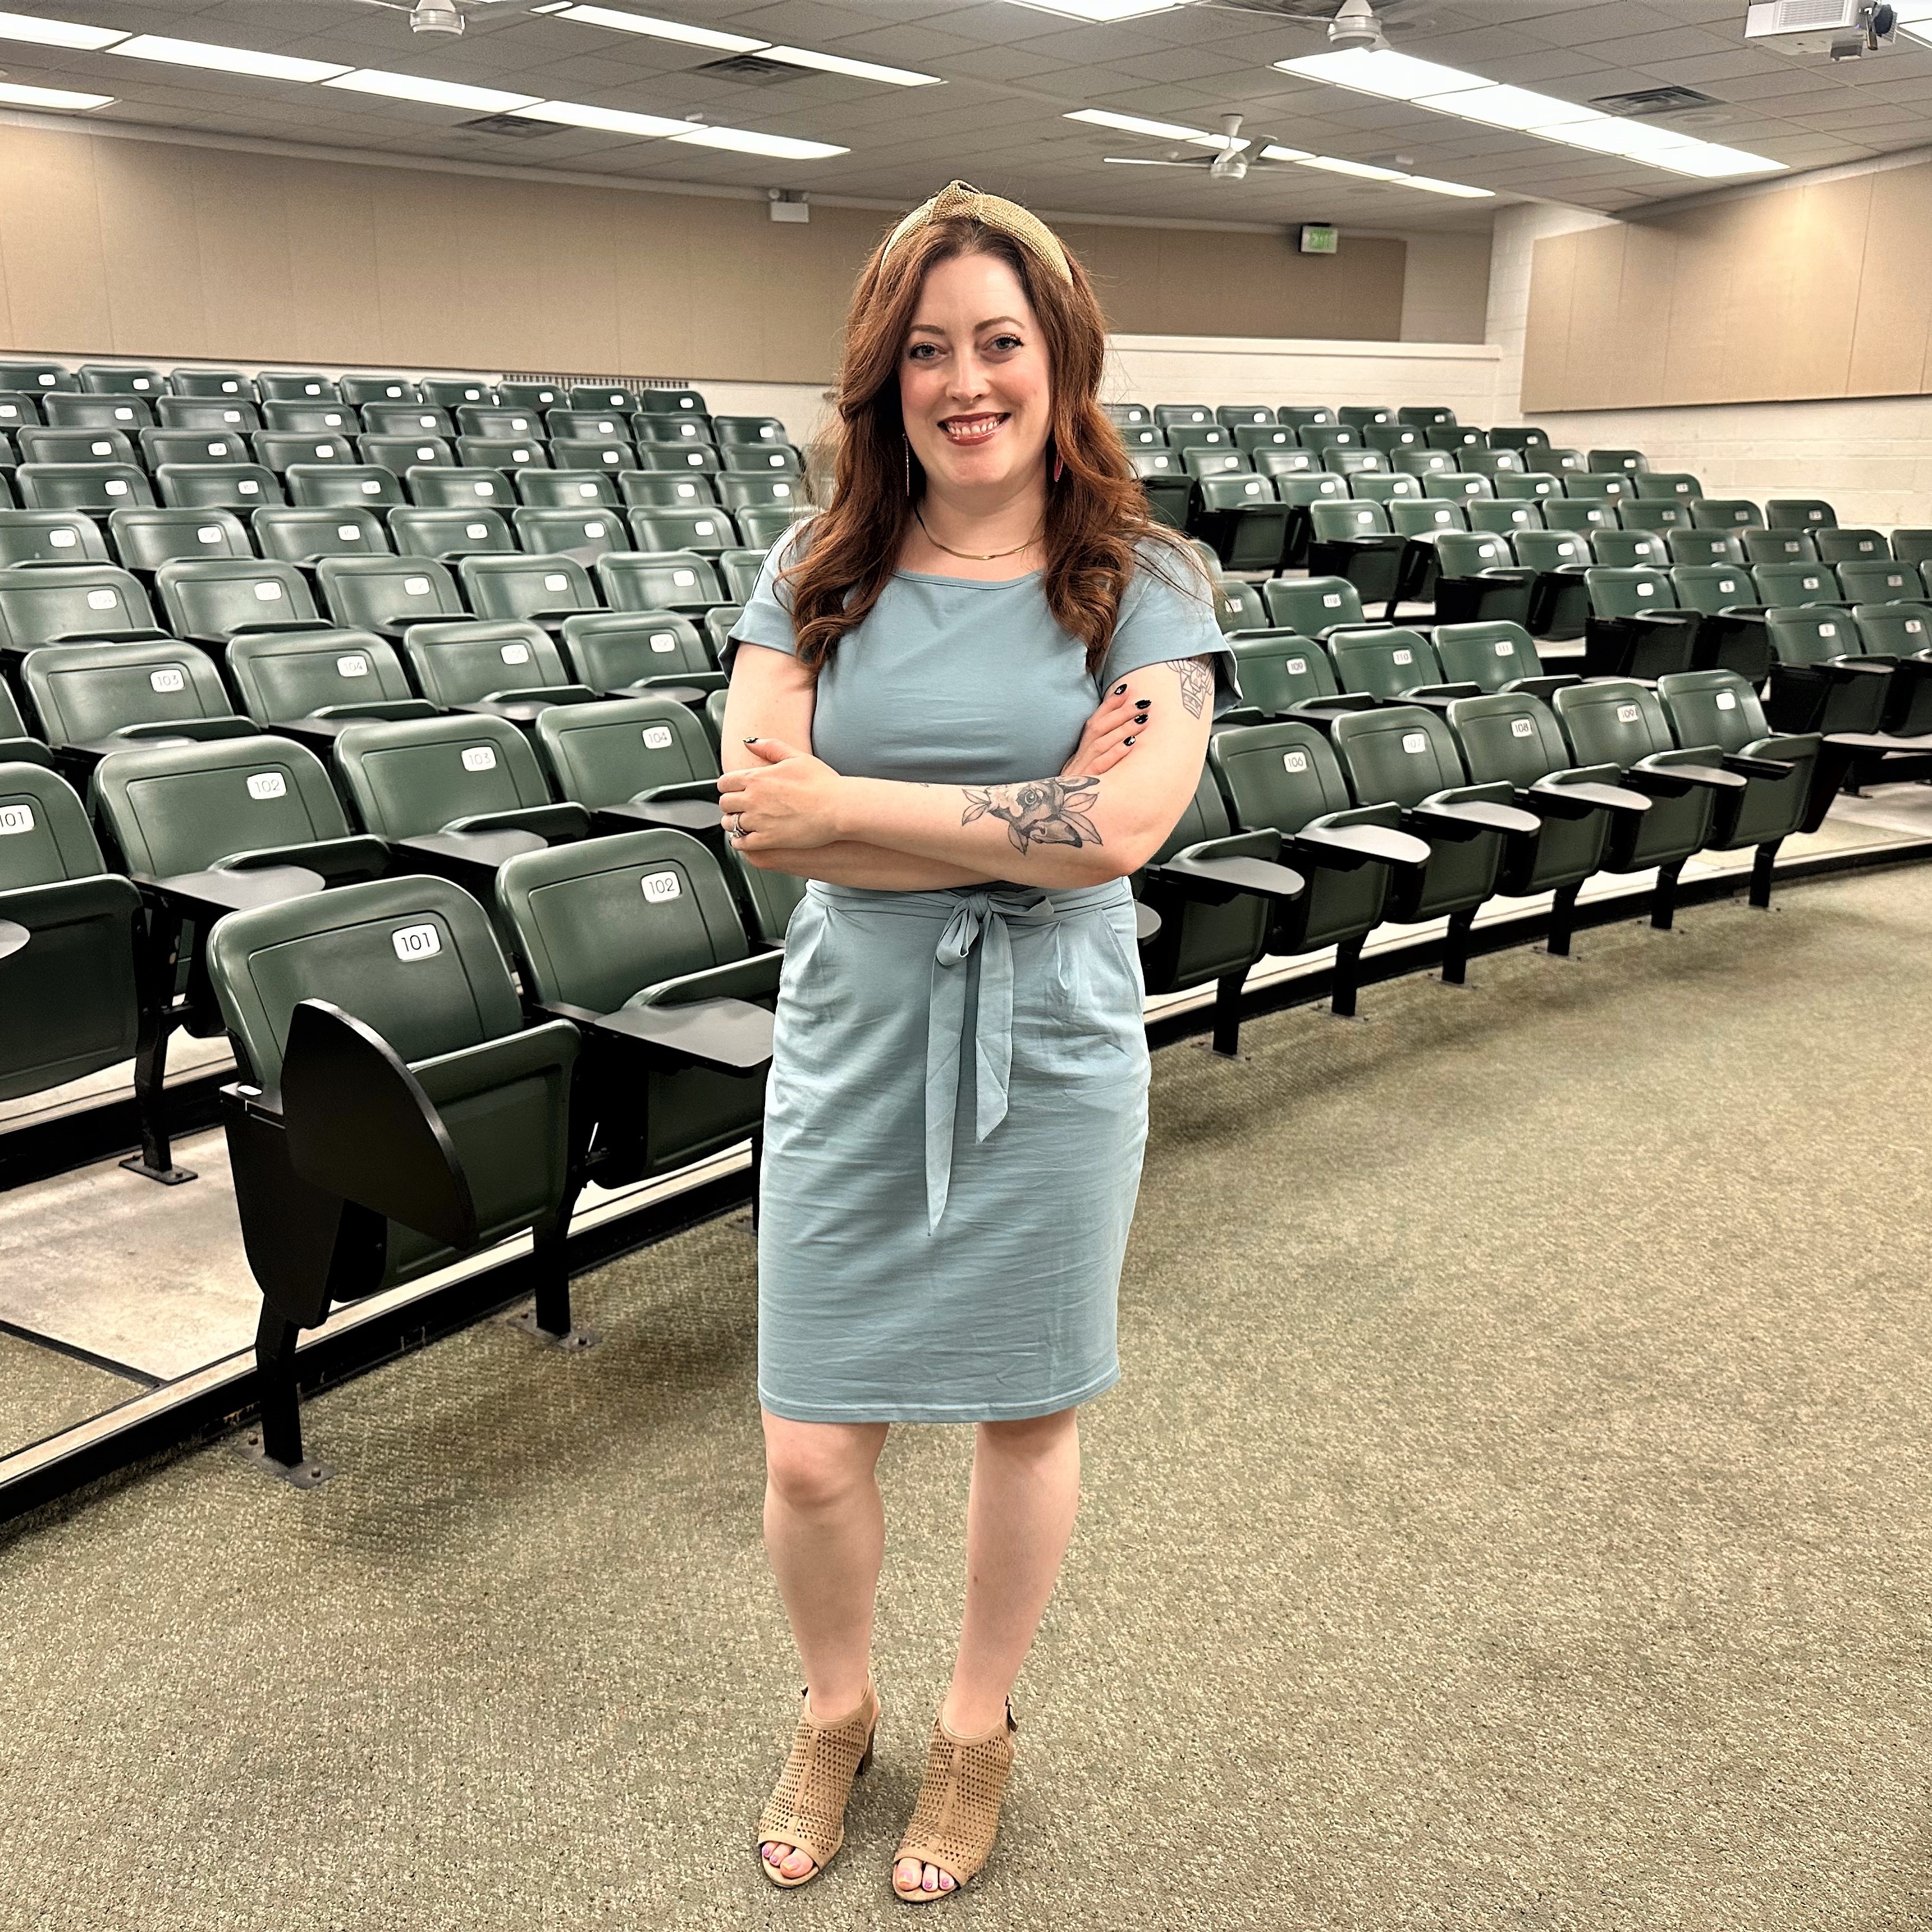 Dr. Clements stands in front of an empty classroom with her arms crossed.